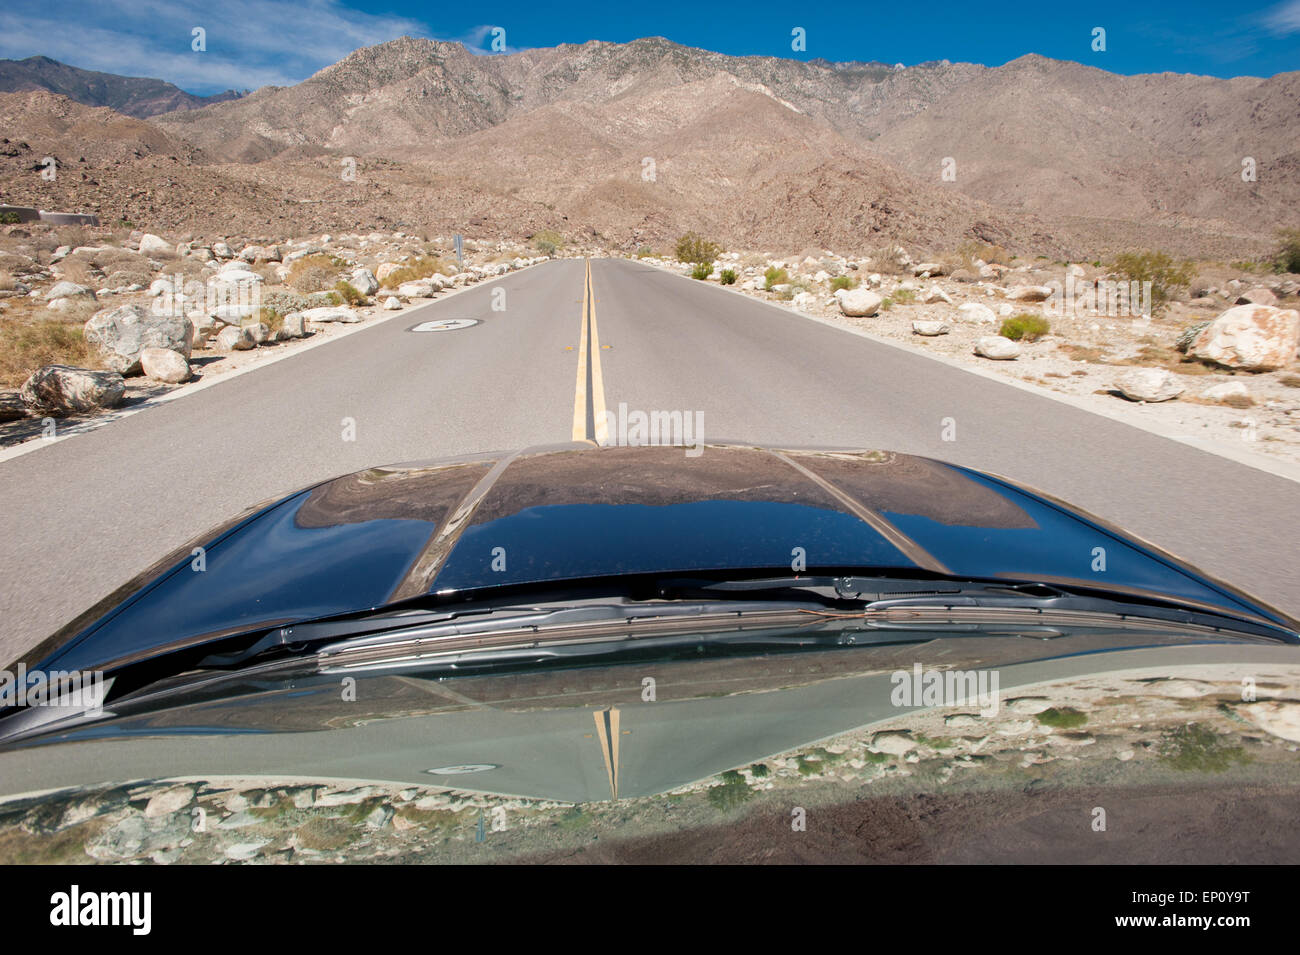 Front of car and middle of a road near Palm Springs, California Stock Photo